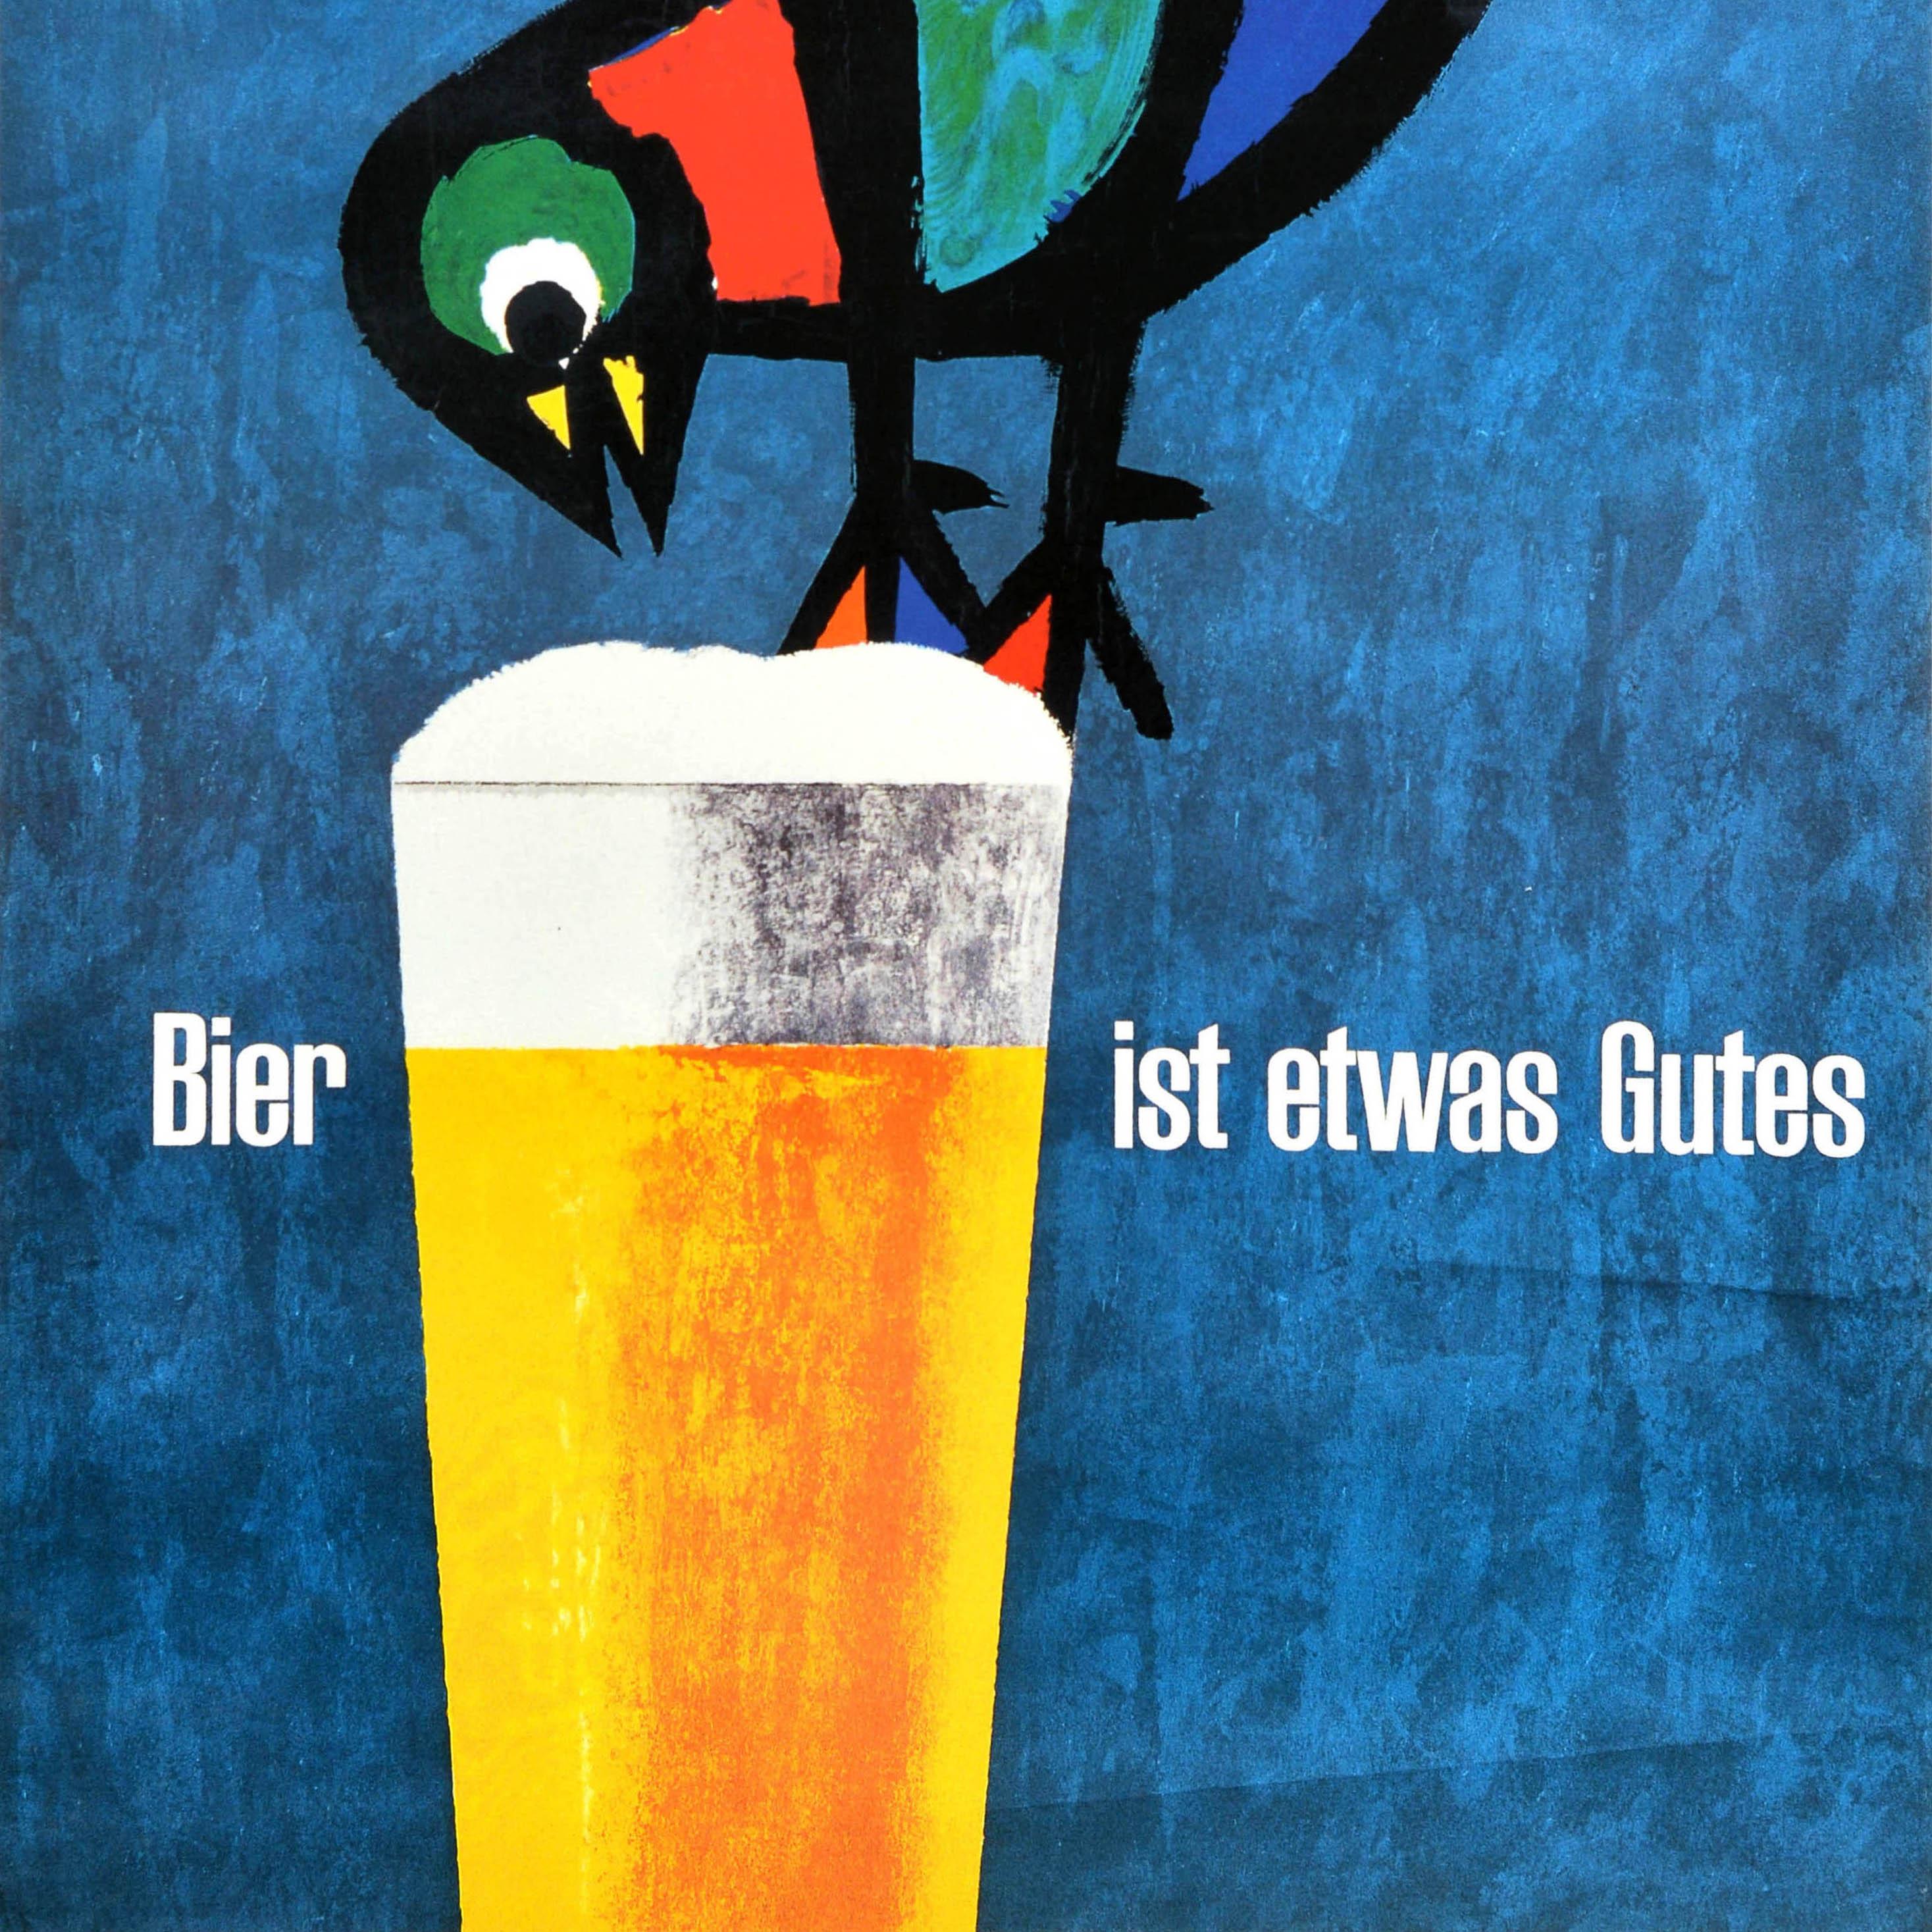 Original Vintage Drink Advertising Poster Beer Is A Good Thing Bird Piatti Bier In Excellent Condition For Sale In London, GB